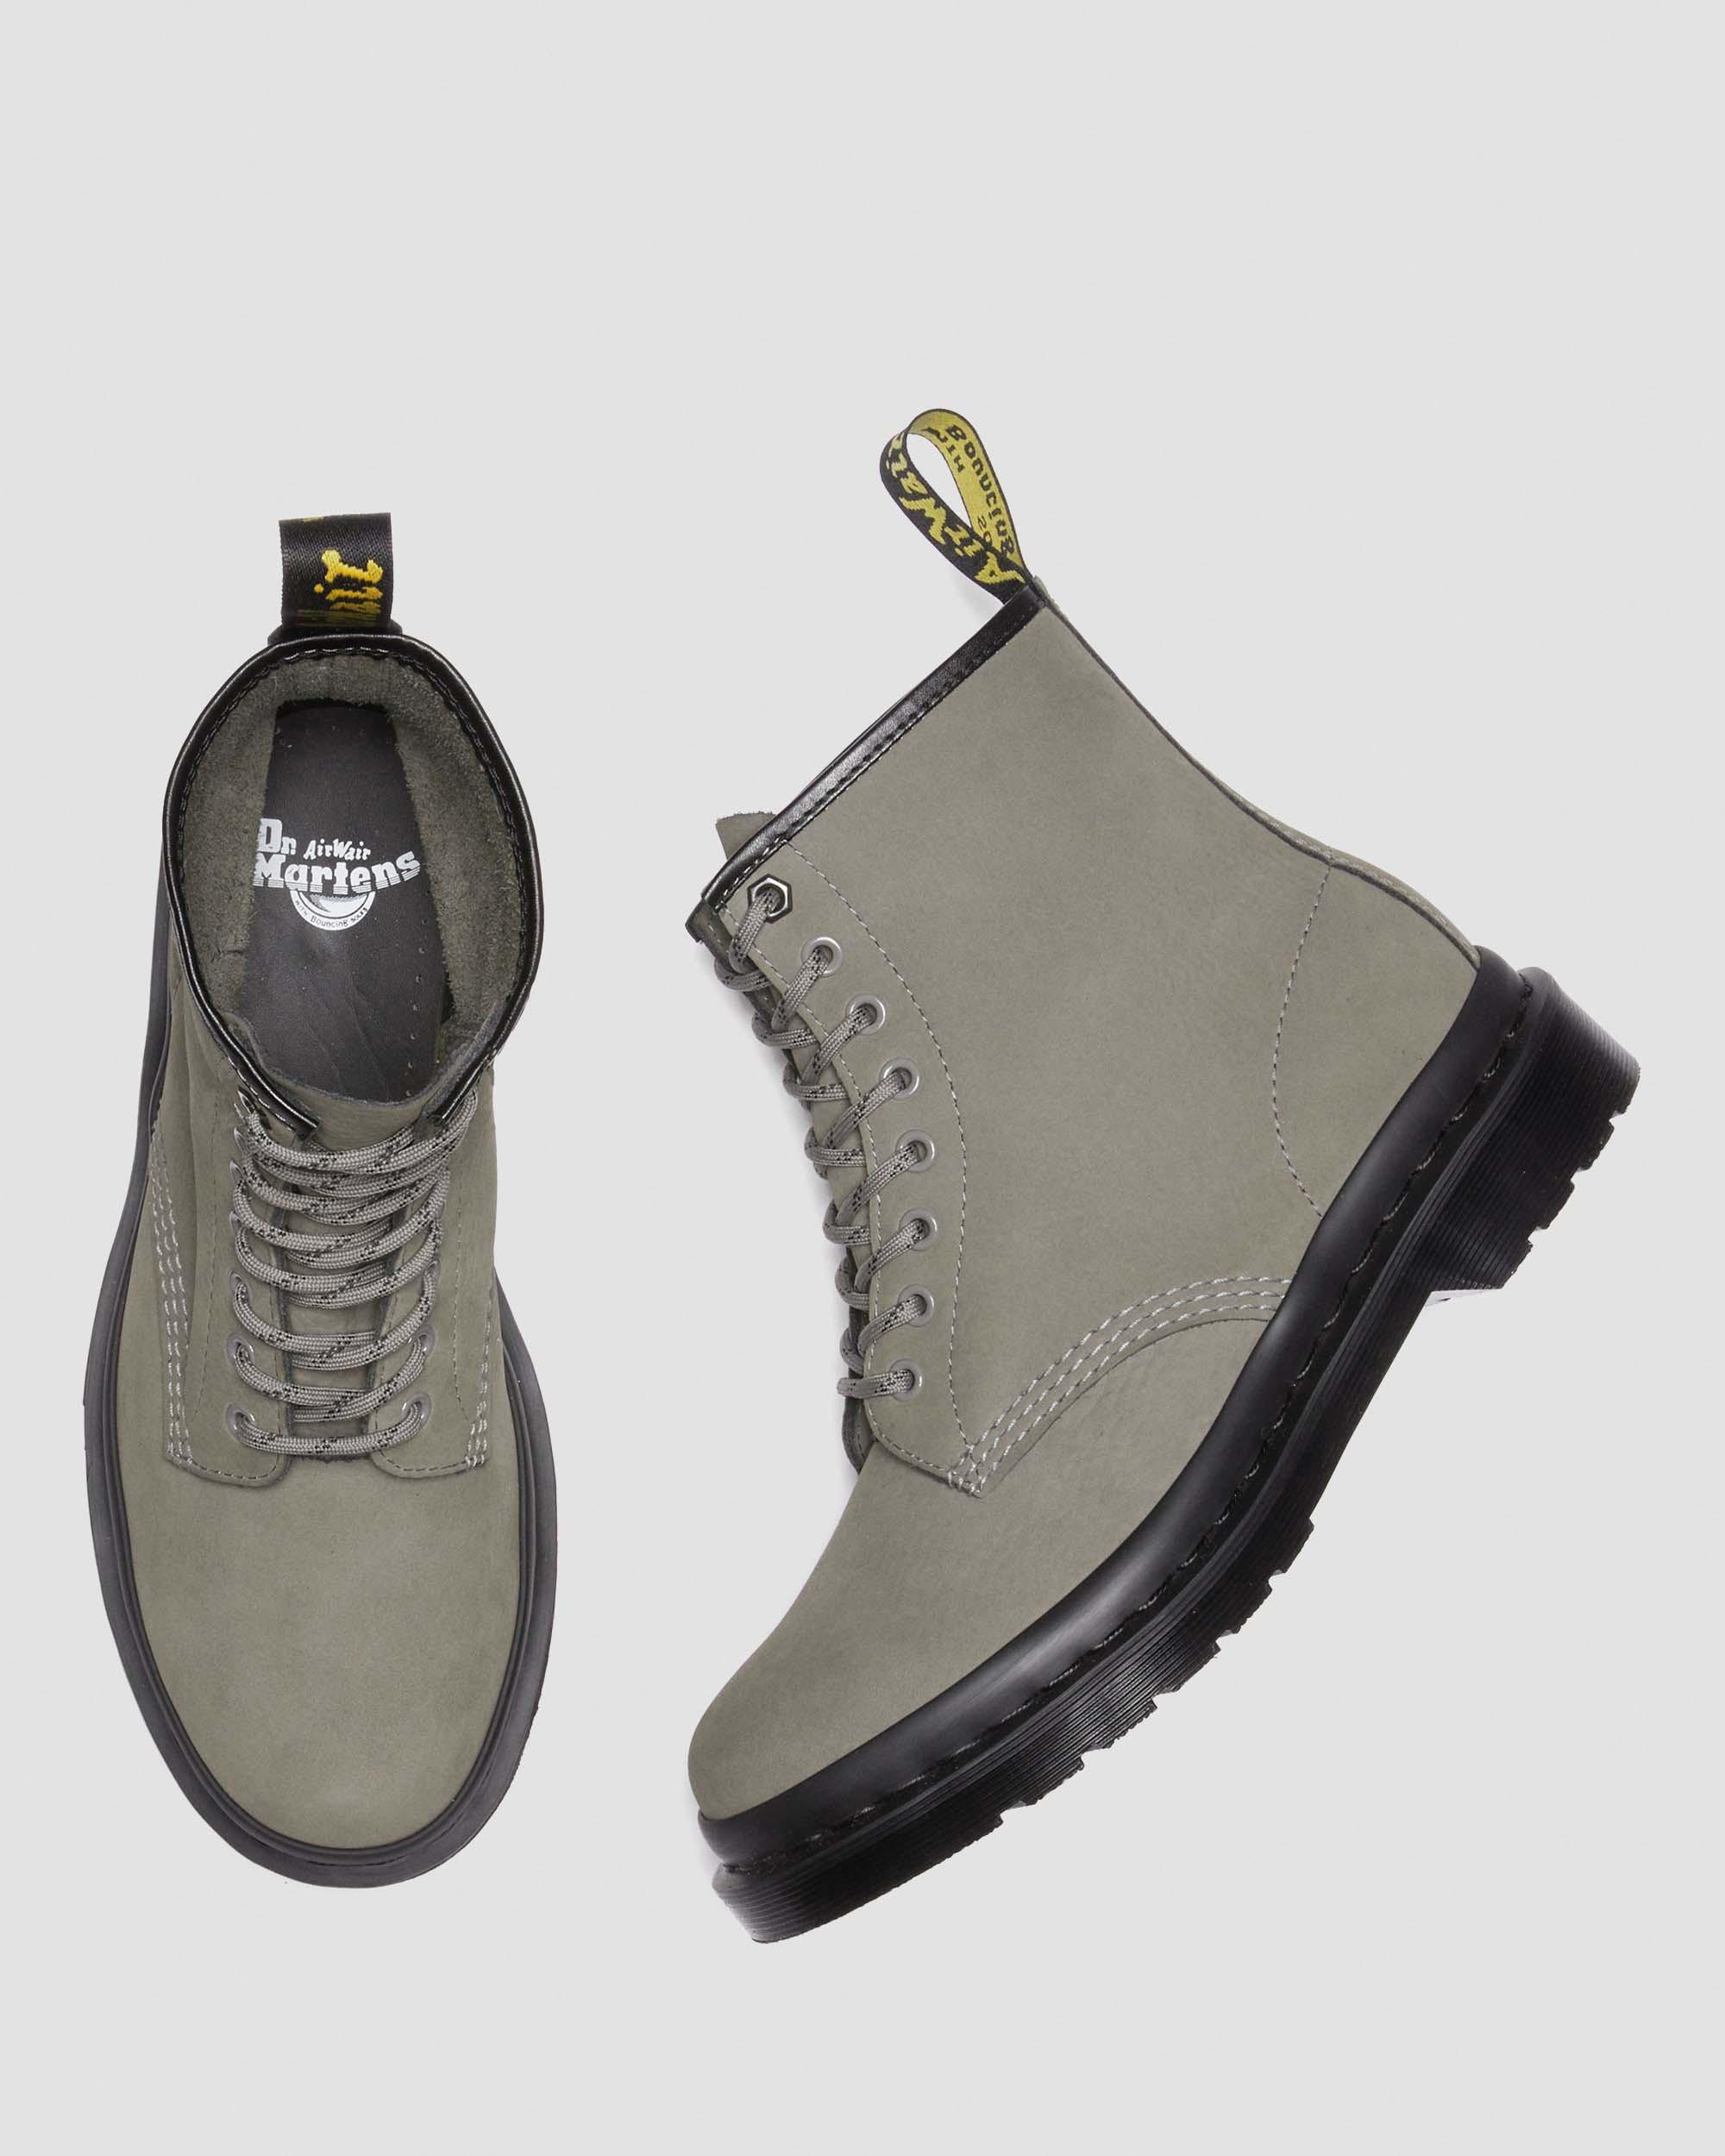 1460 Milled Nubuck Leather Lace Up Boots in NICKEL GREY